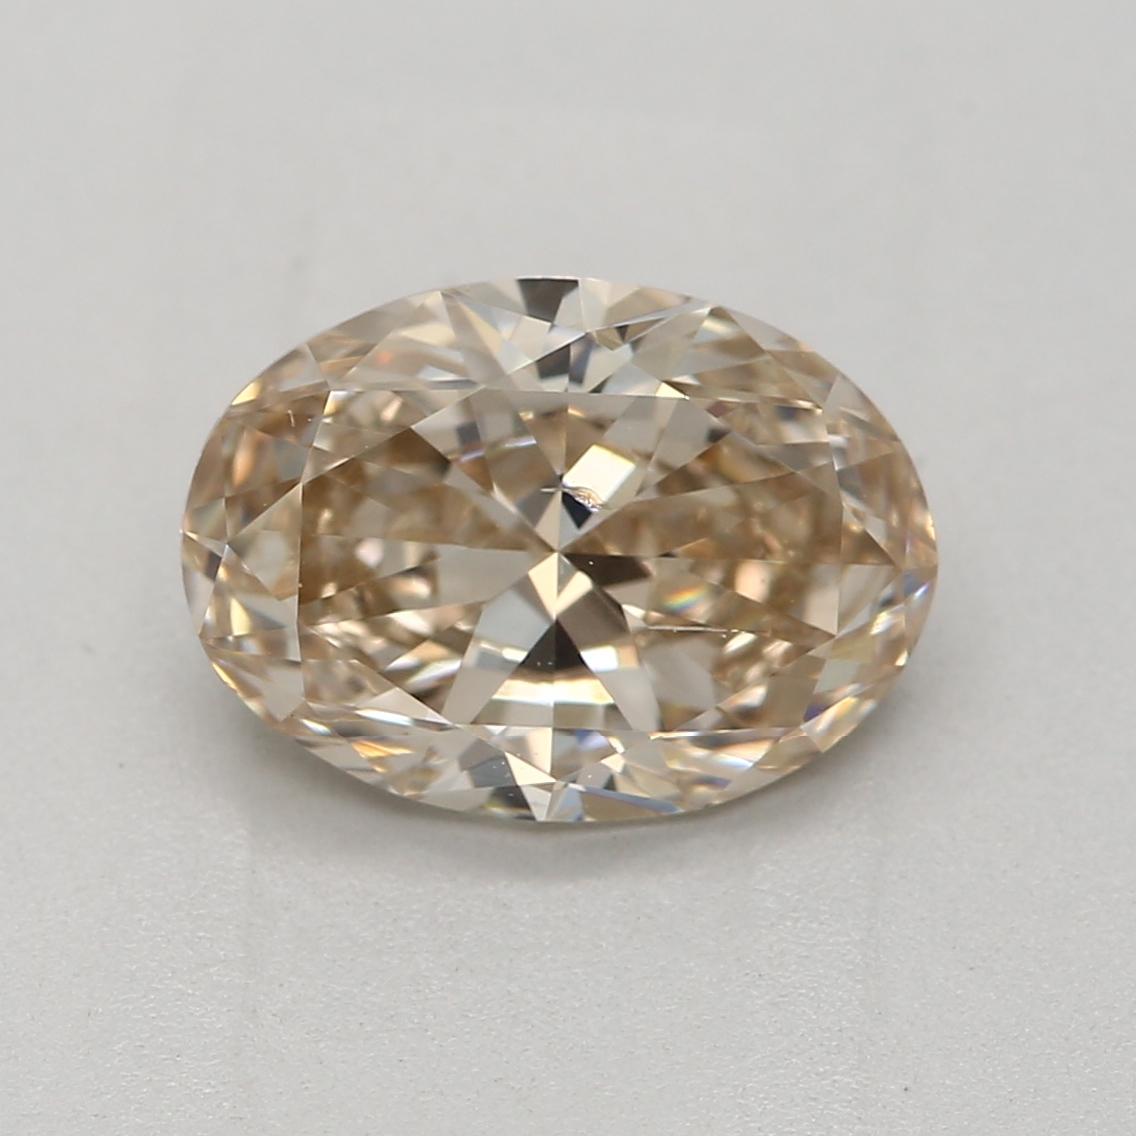 **100% NATURAL FANCY COLOUR DIAMOND**

✪ Diamond Details ✪

➛ Shape: Oval
➛ Colour Grade: W-X, Light Brown
➛ Carat: 1.00
➛ Clarity: SI1
➛ GIA Certified 

^FEATURES OF THE DIAMOND^

This 1-carat light brown diamond typically exhibits a warm and